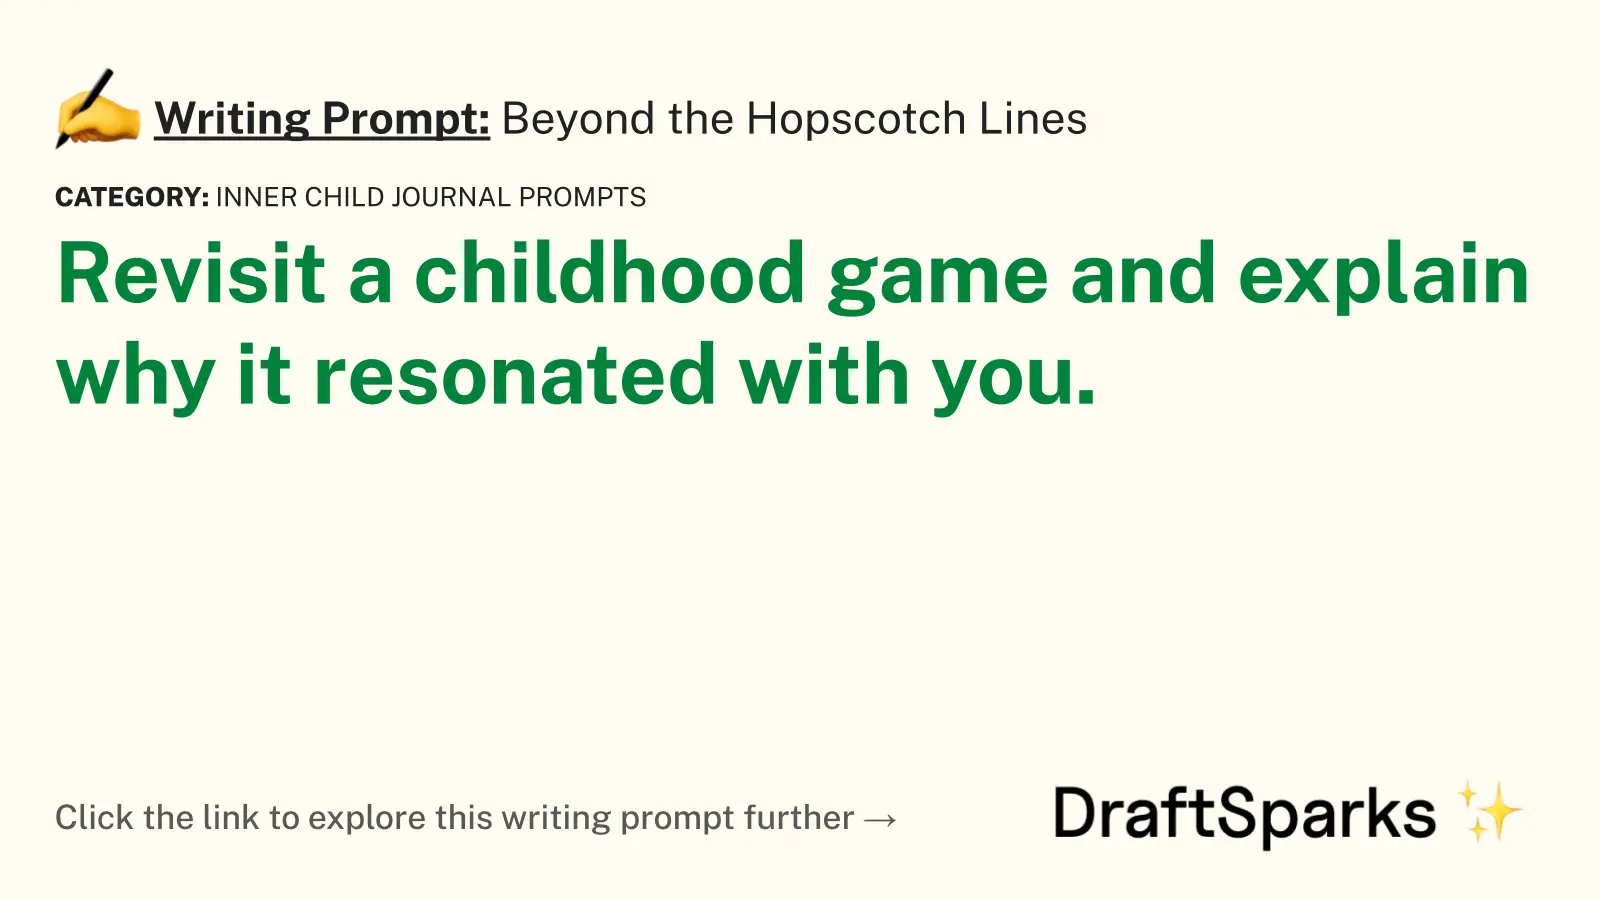 Beyond the Hopscotch Lines